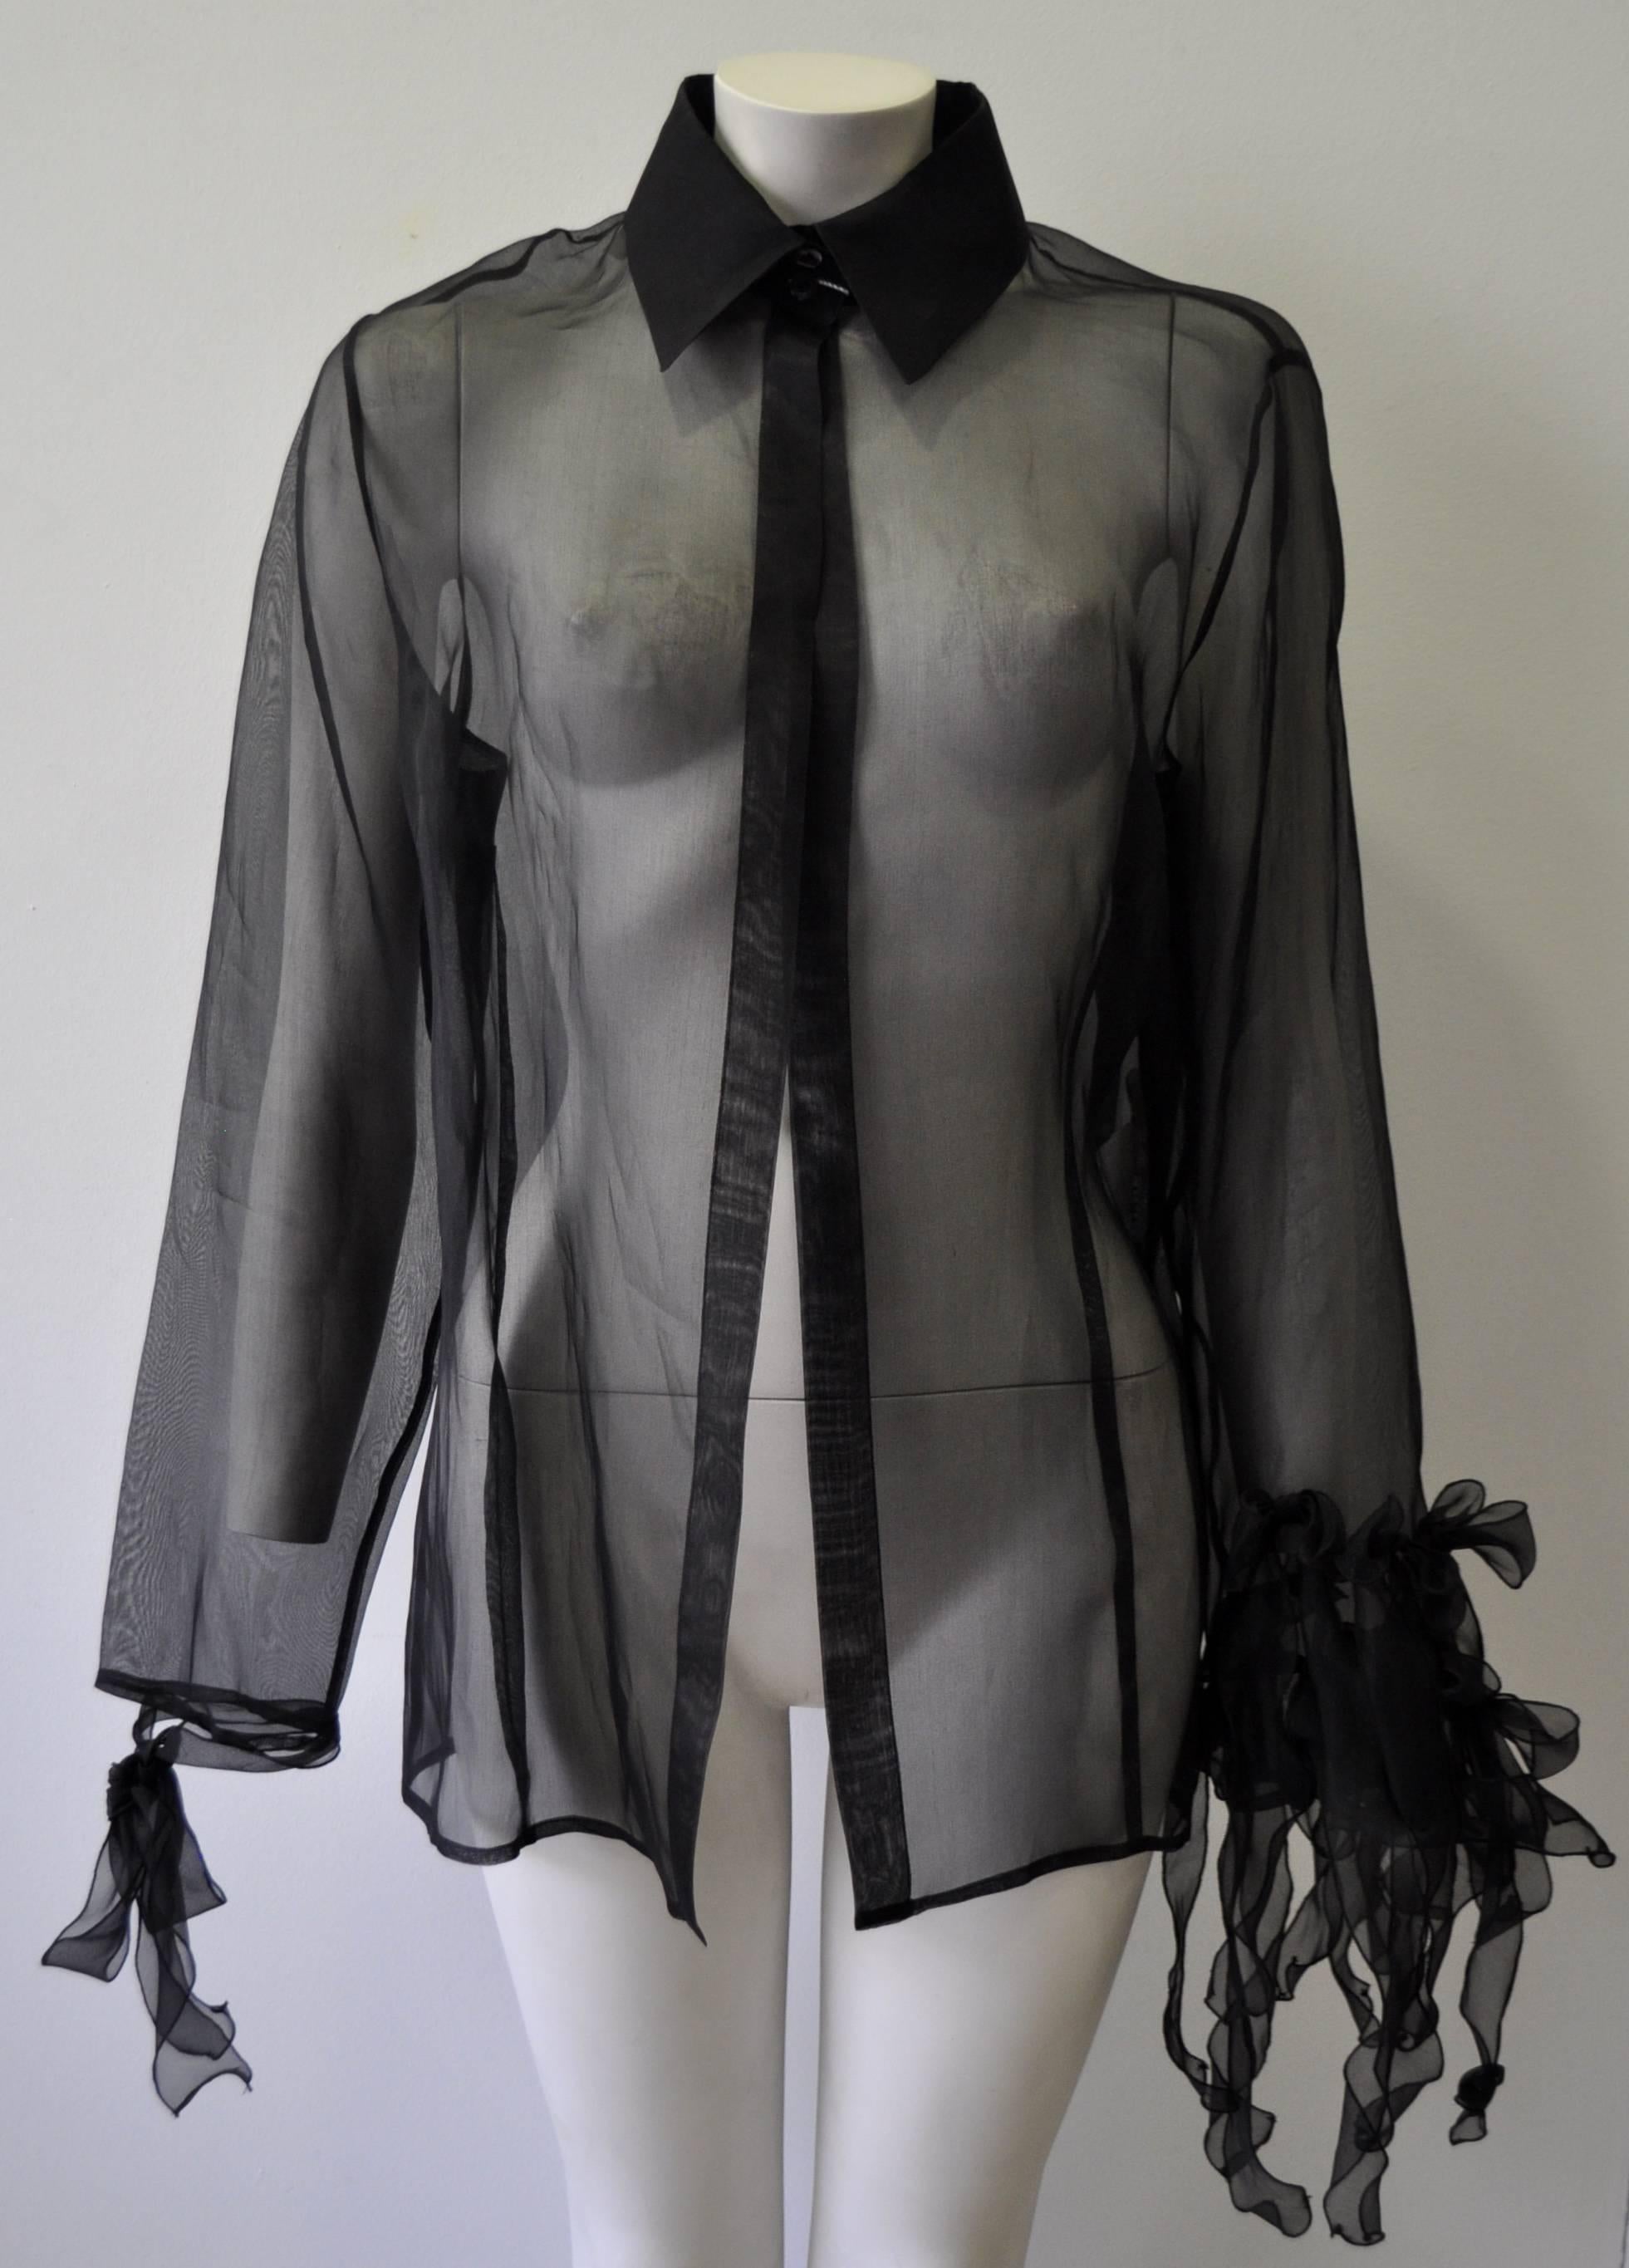 Highly Unusual Gianfranco Ferre Forma Sheer Silk Blouse with Ribbon Bow Sleeve Detail